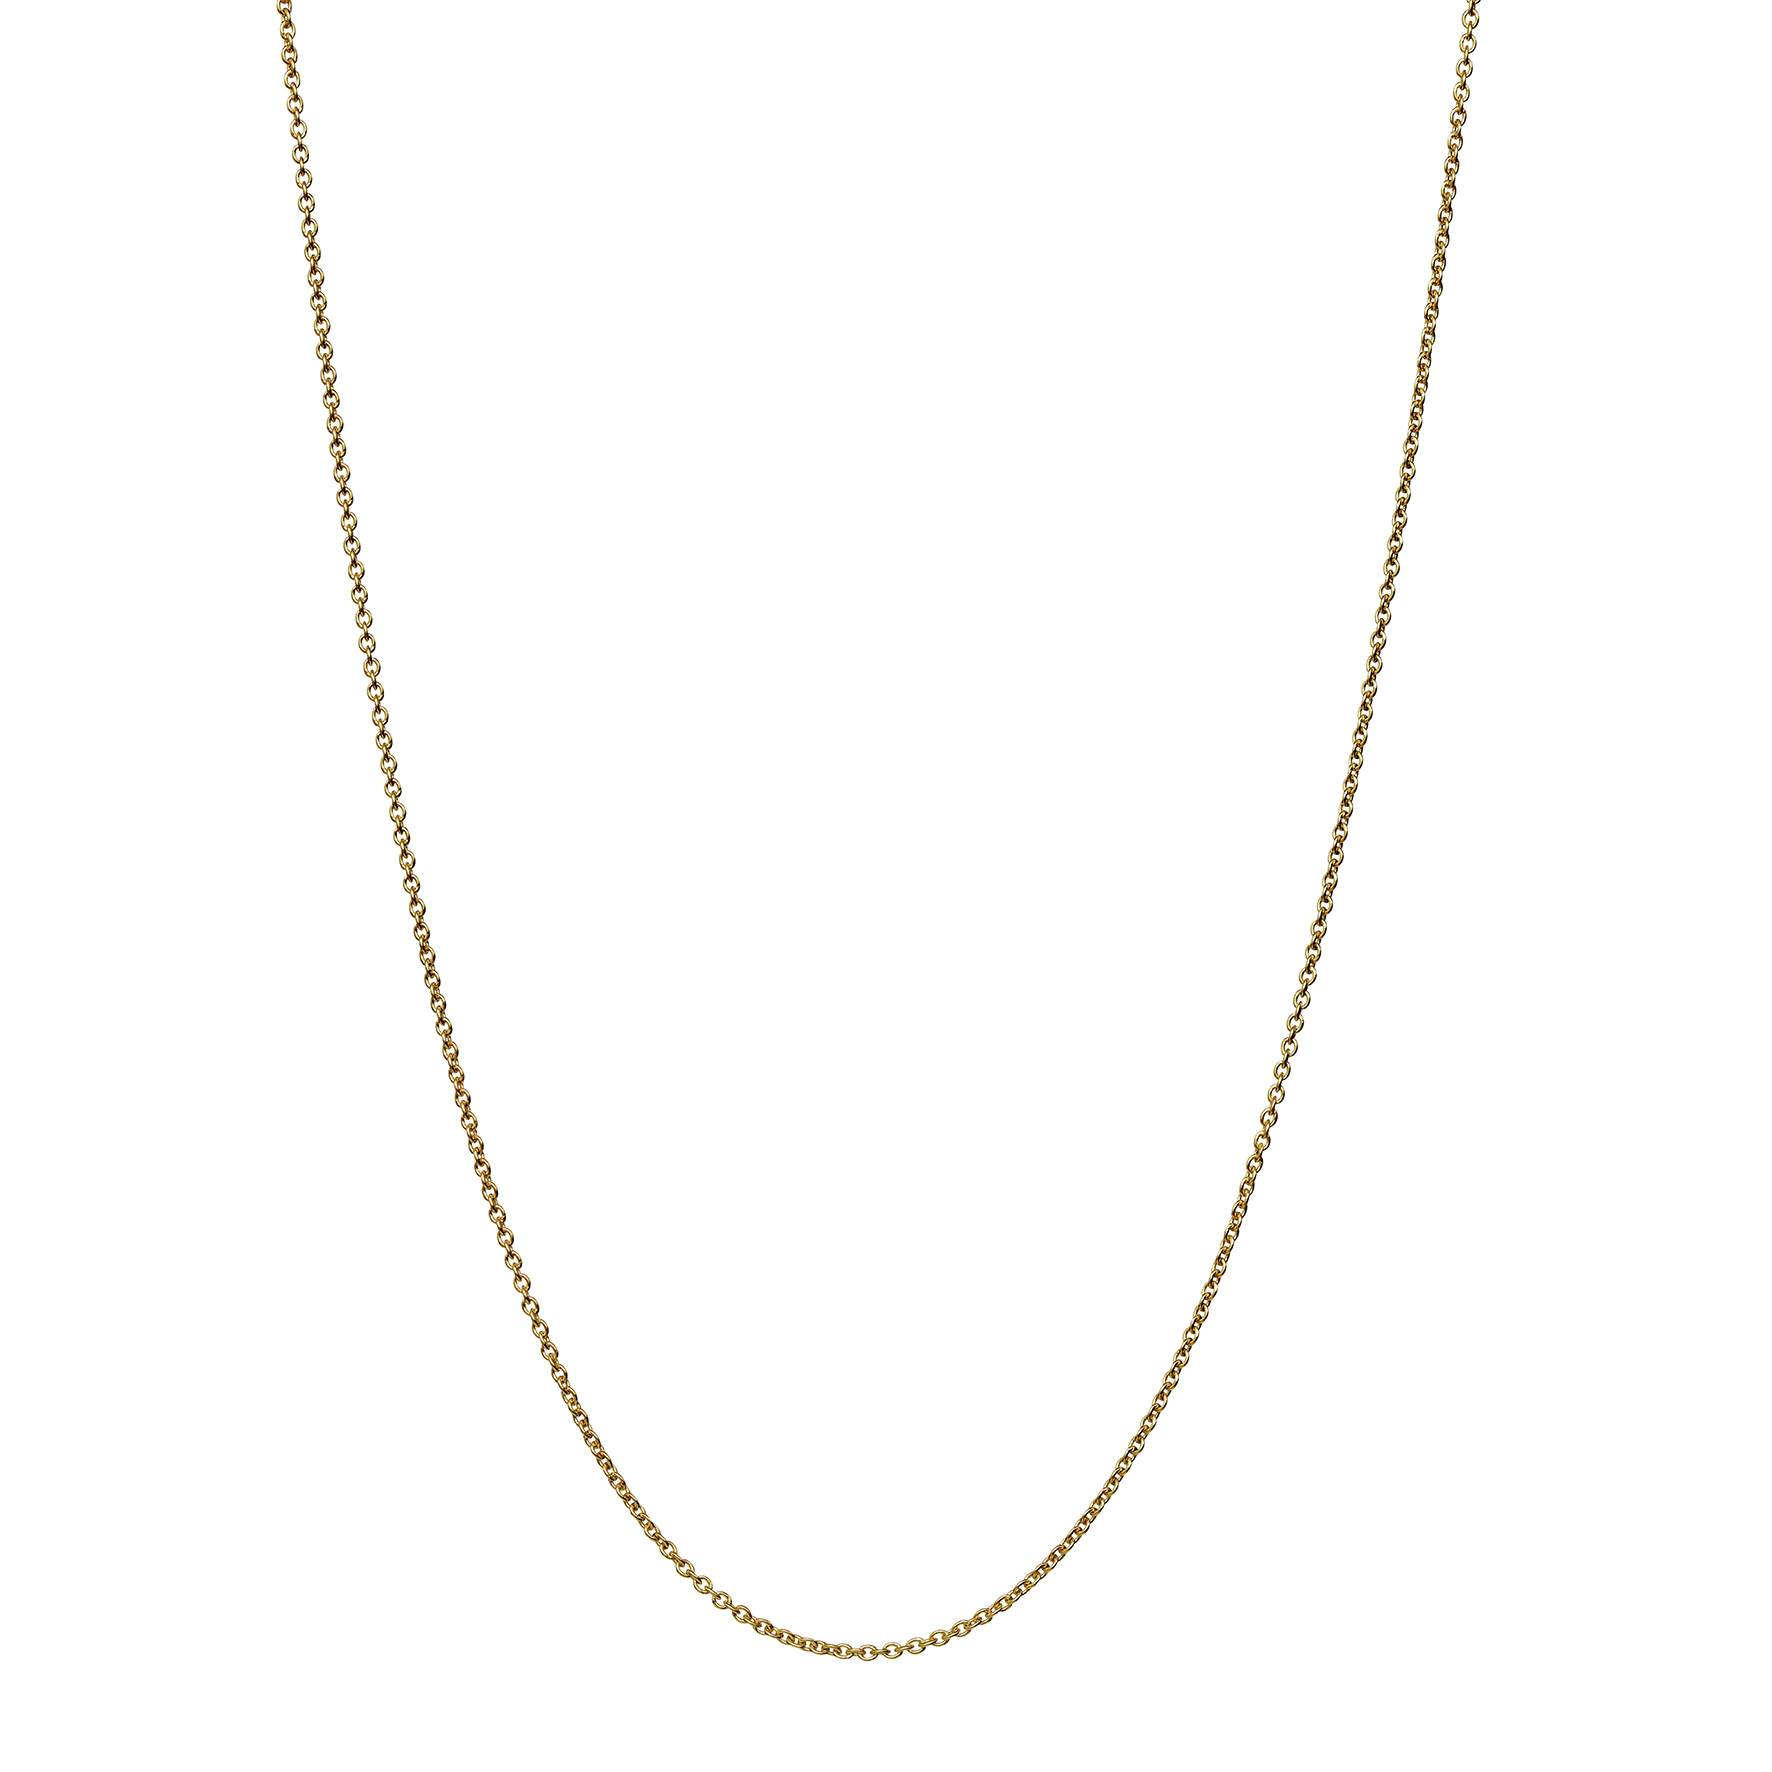 Charlie Grande Necklace from Maanesten in Goldplated-Silver Sterling 925